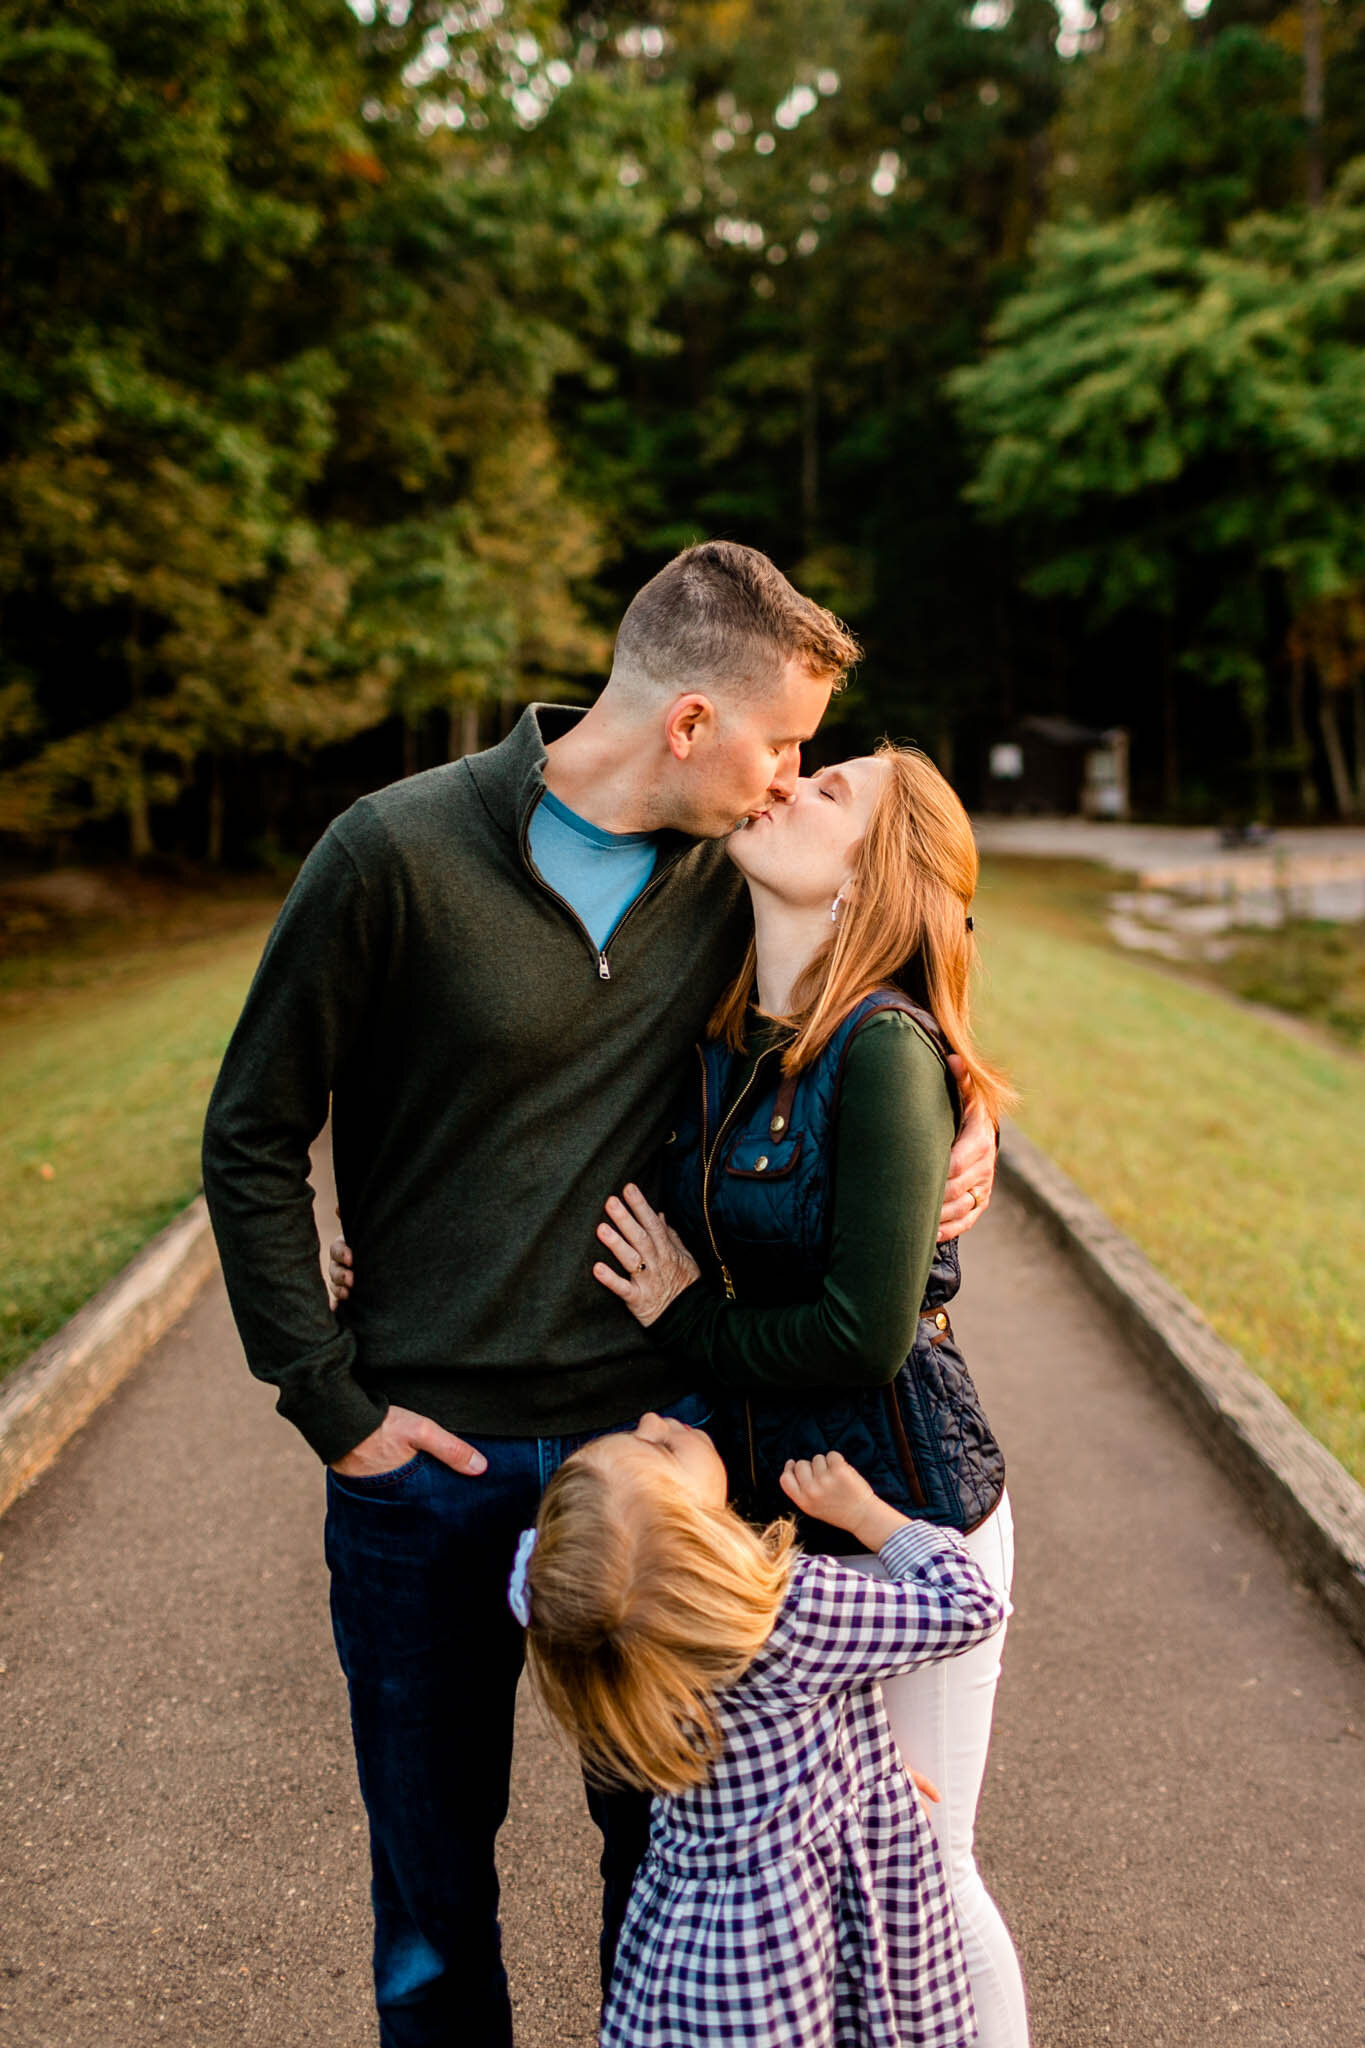 Raleigh Family Photographer | Umstead Park | By G. Lin Photography | Husband and wife kissing